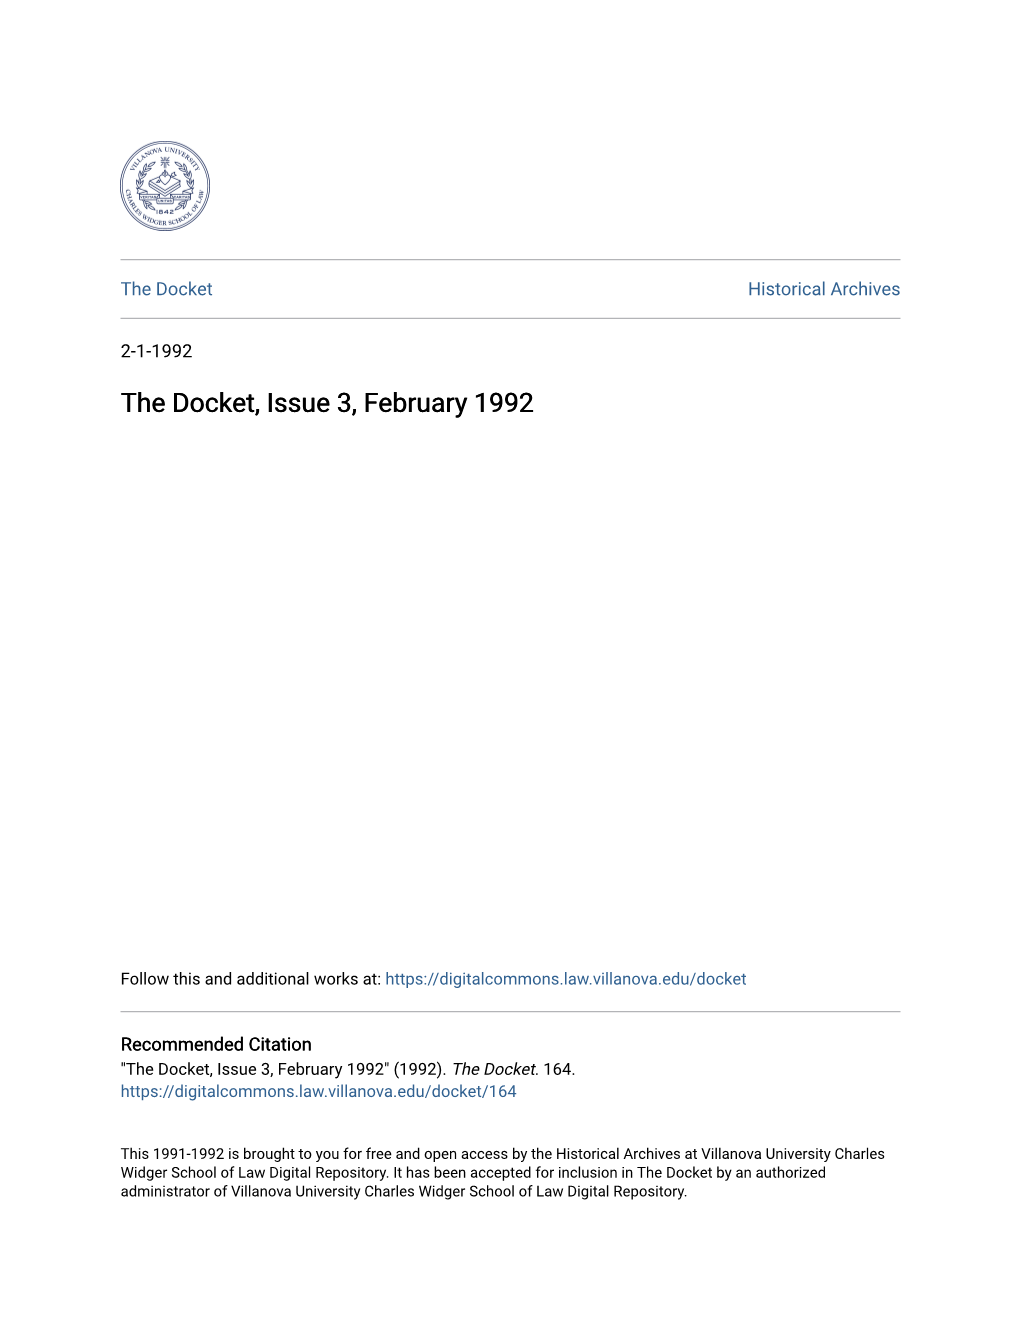 The Docket, Issue 3, February 1992